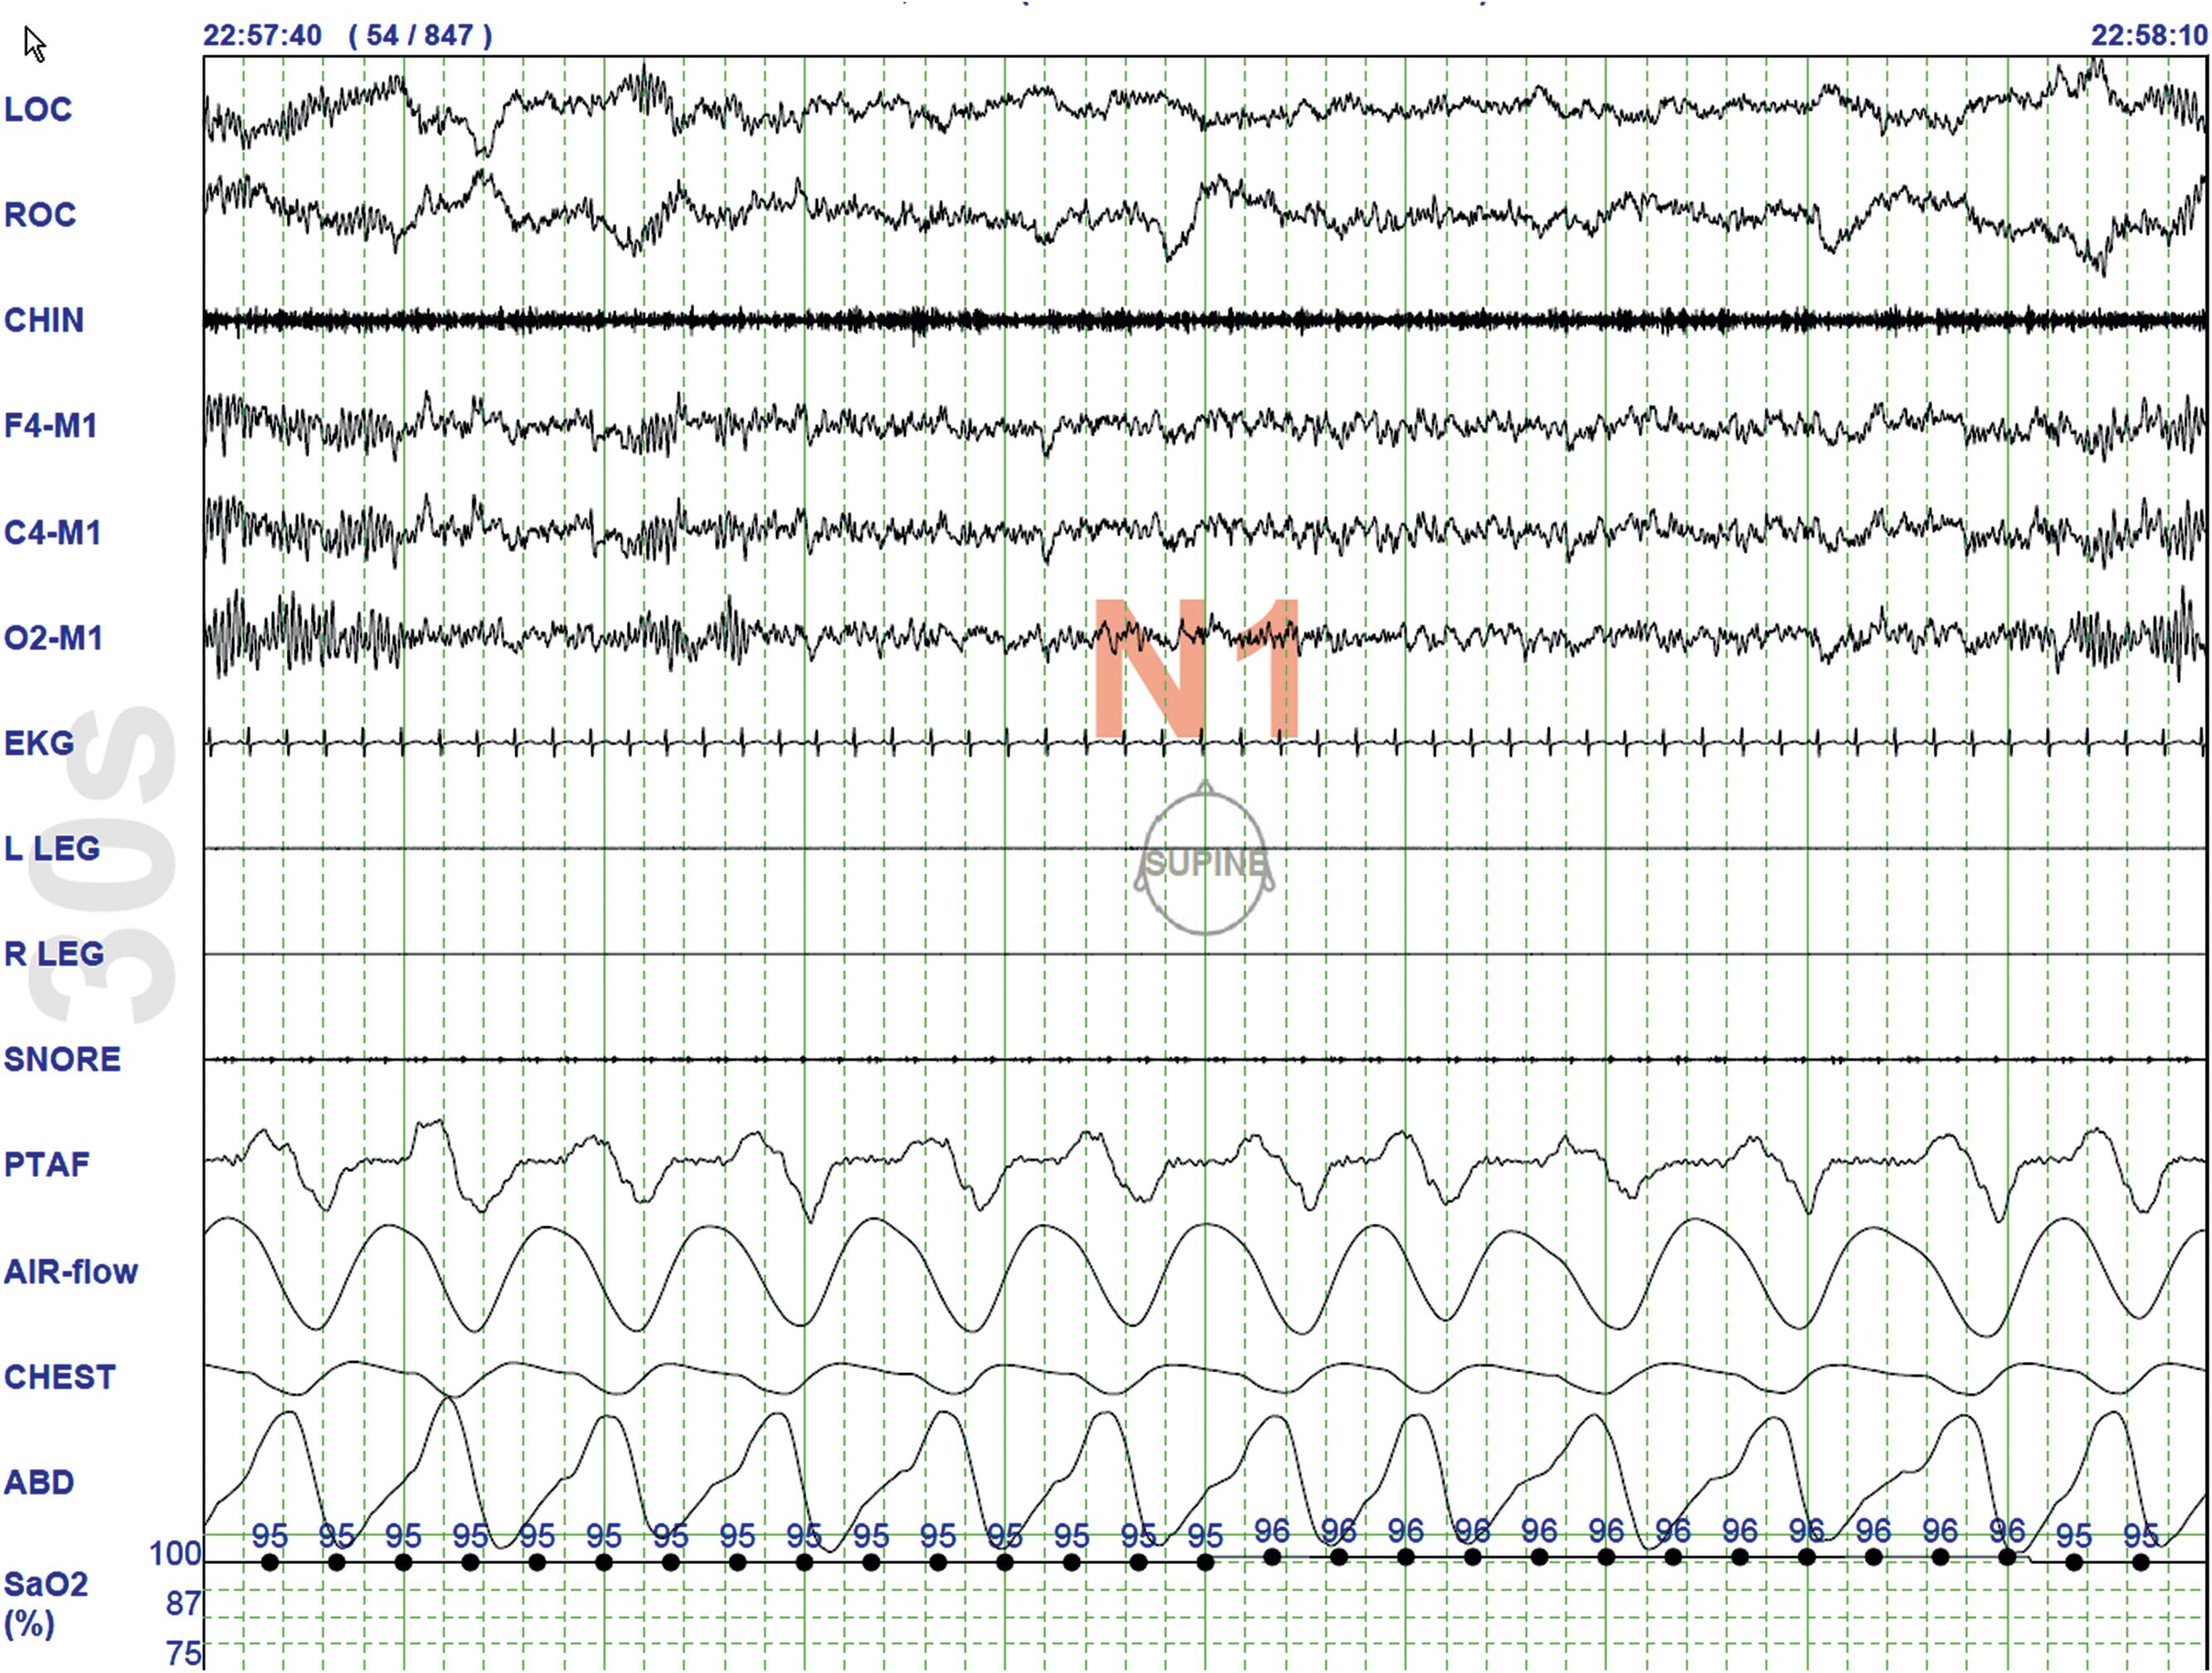 Fig. 101.3, Polysomnographic Recording Shows Stage 1 Nonrapid Eye Movement (NREM) Sleep (N1) in an Adult.